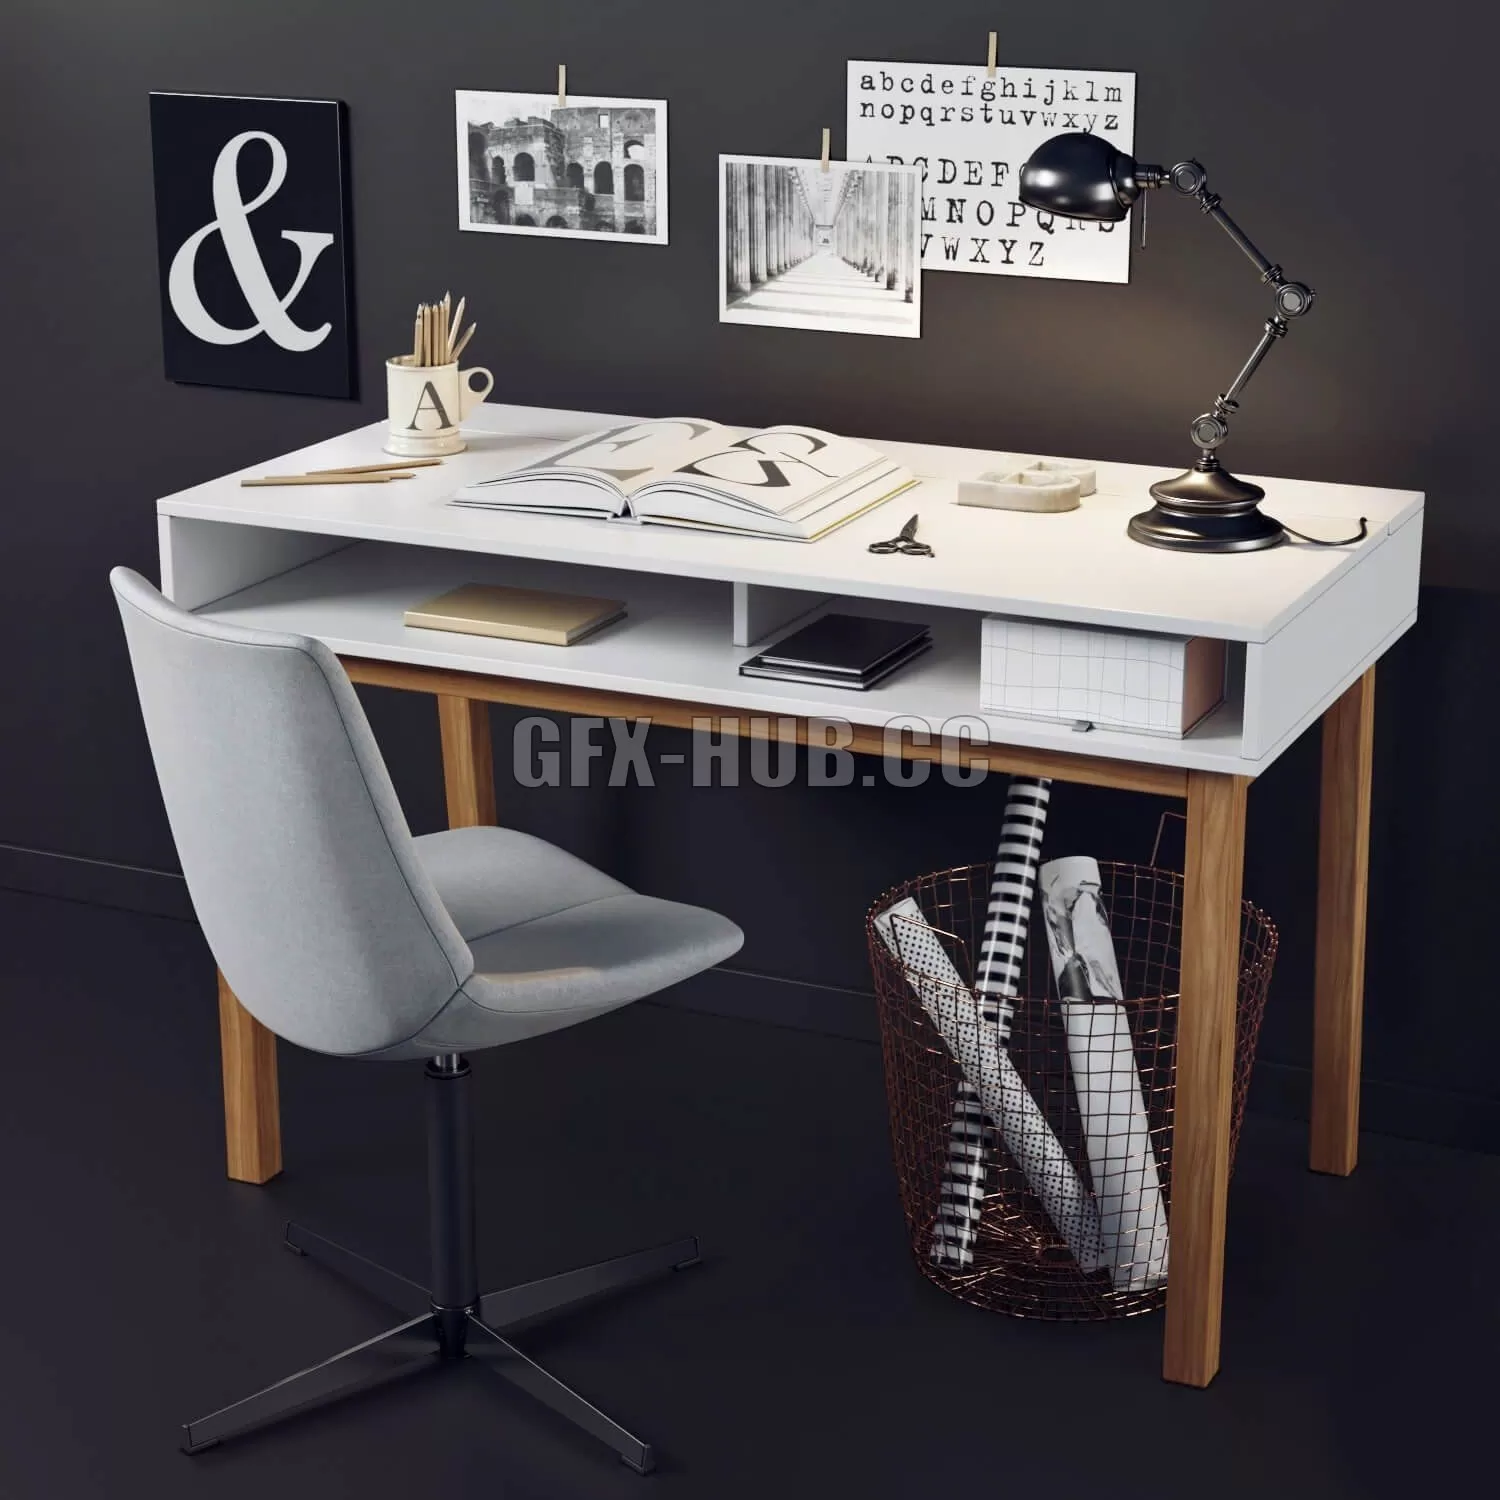 CHAIR – Desk and chair with La Redoute decor